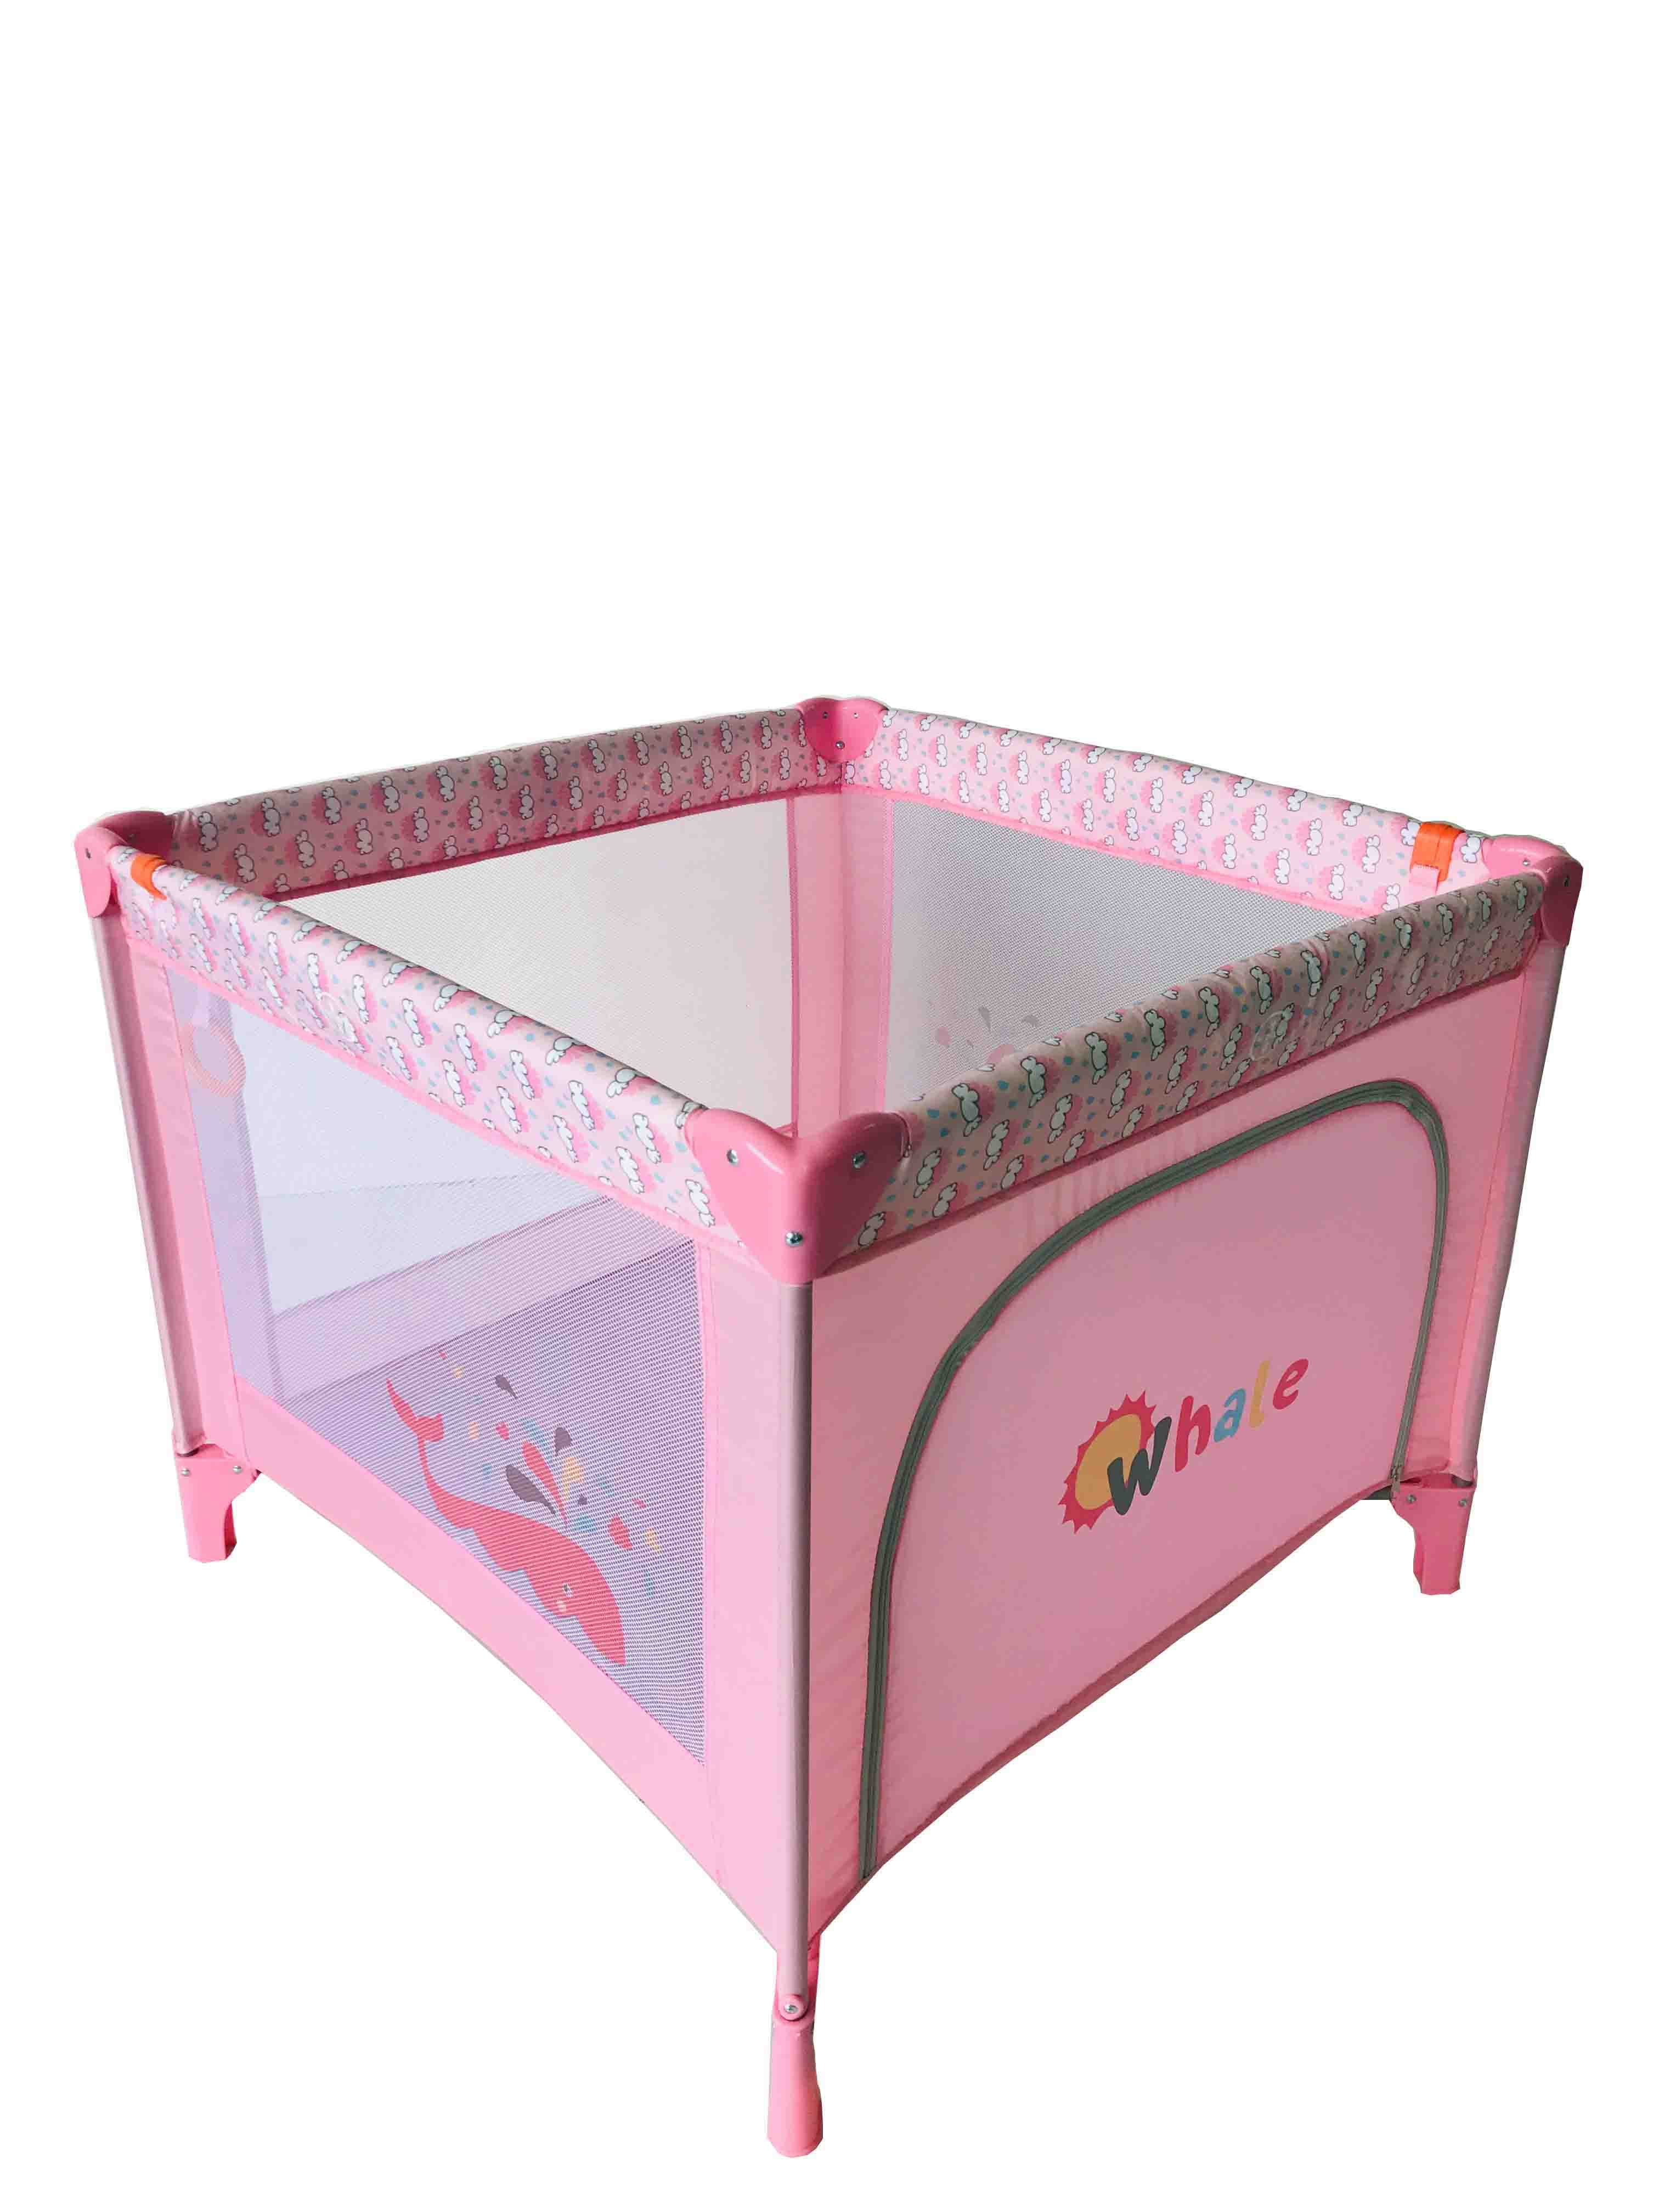 pink square playpen large baby fence play yard